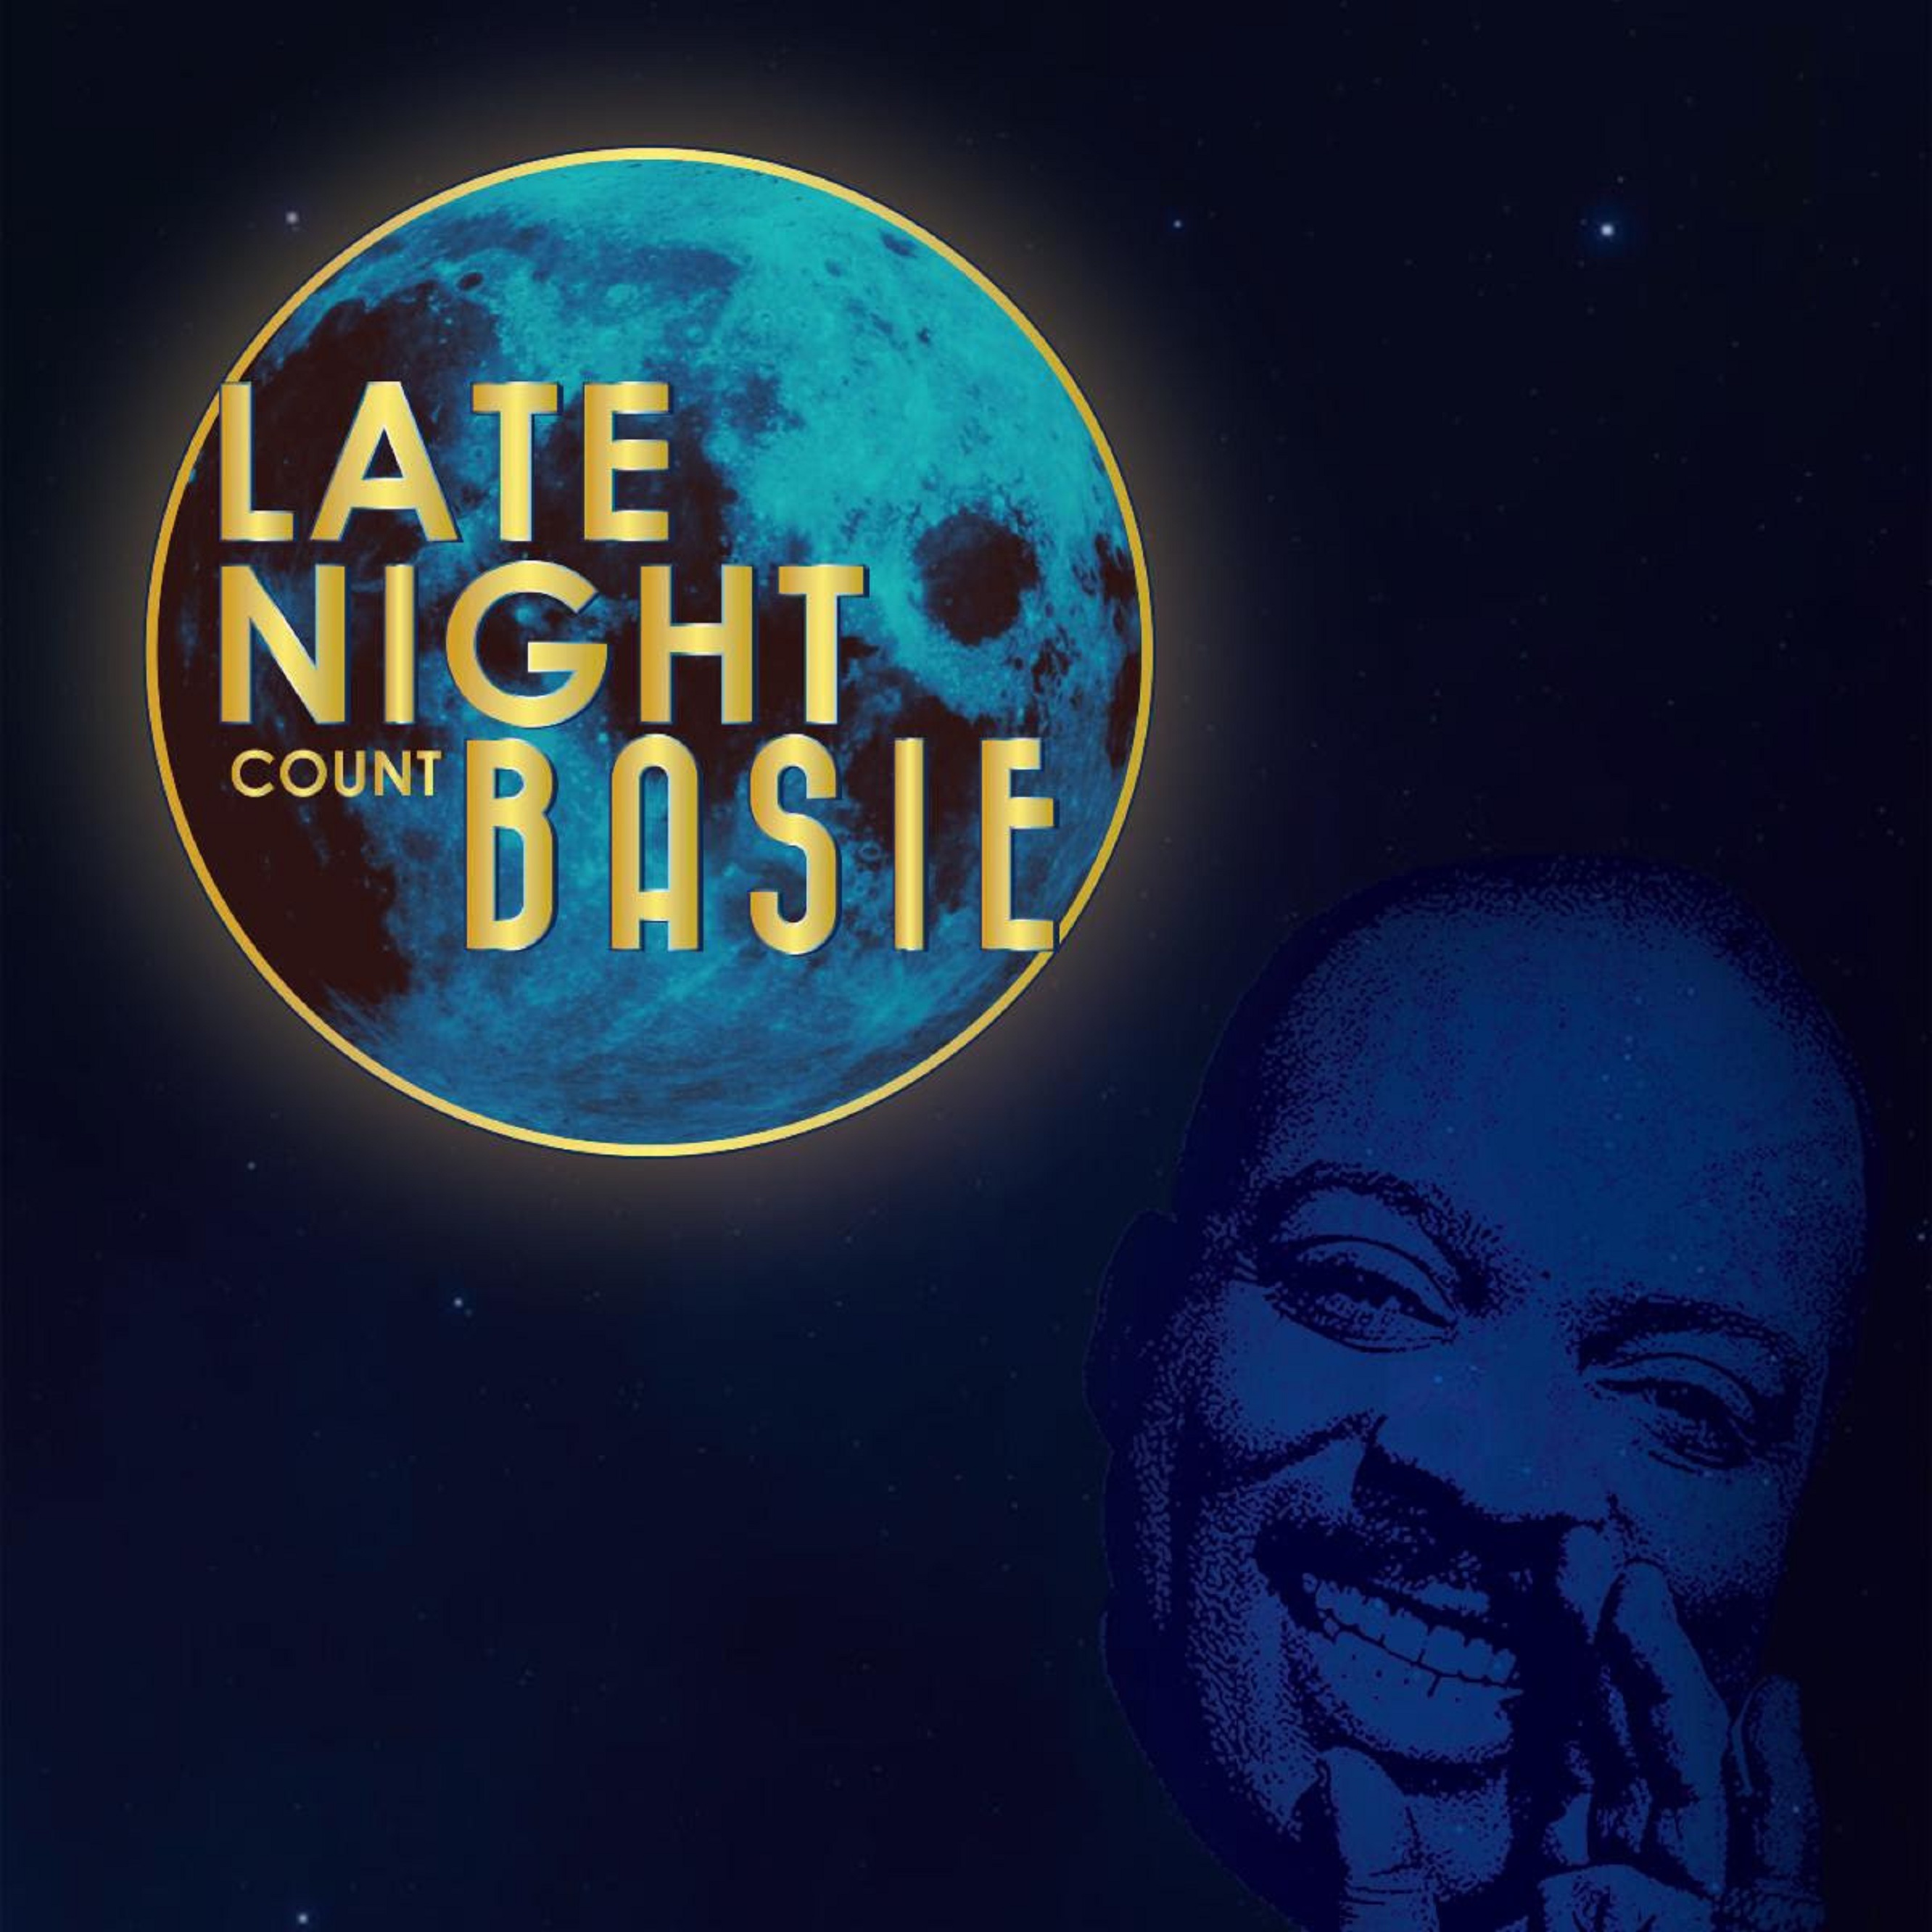 A New Celebration of Count Basie: 'Late Night Basie' Out April 7th via Primary Wave Music